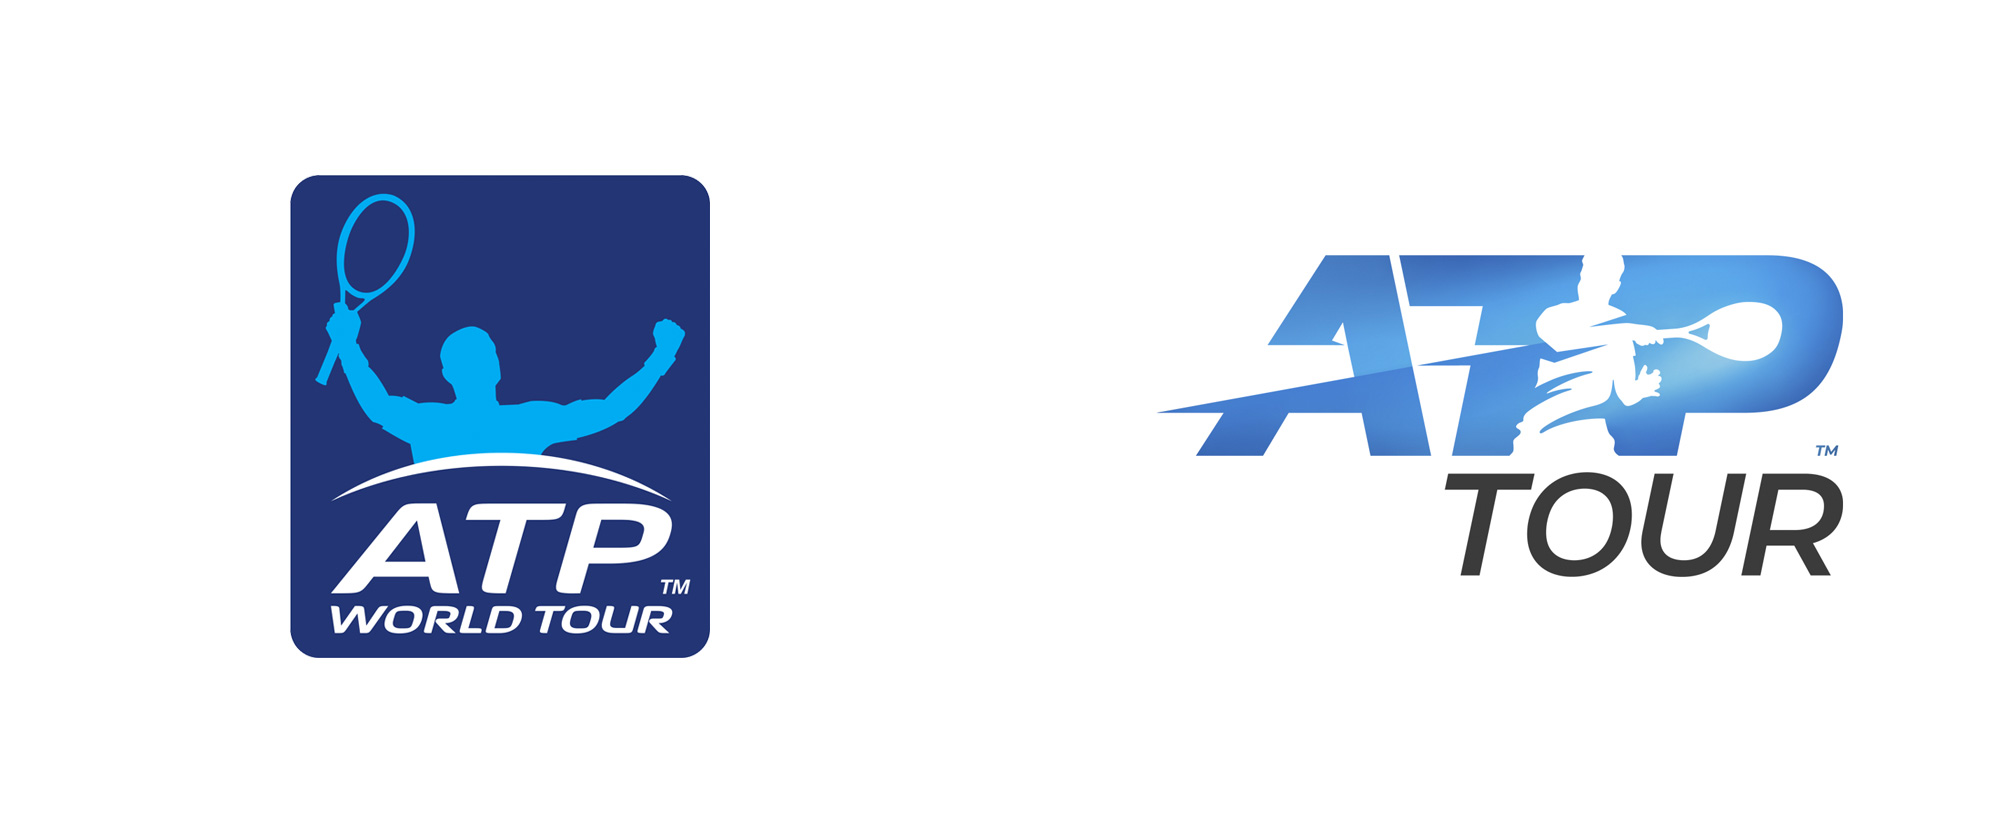 Brand New New Logo And Identity For Atp Tour By Matta